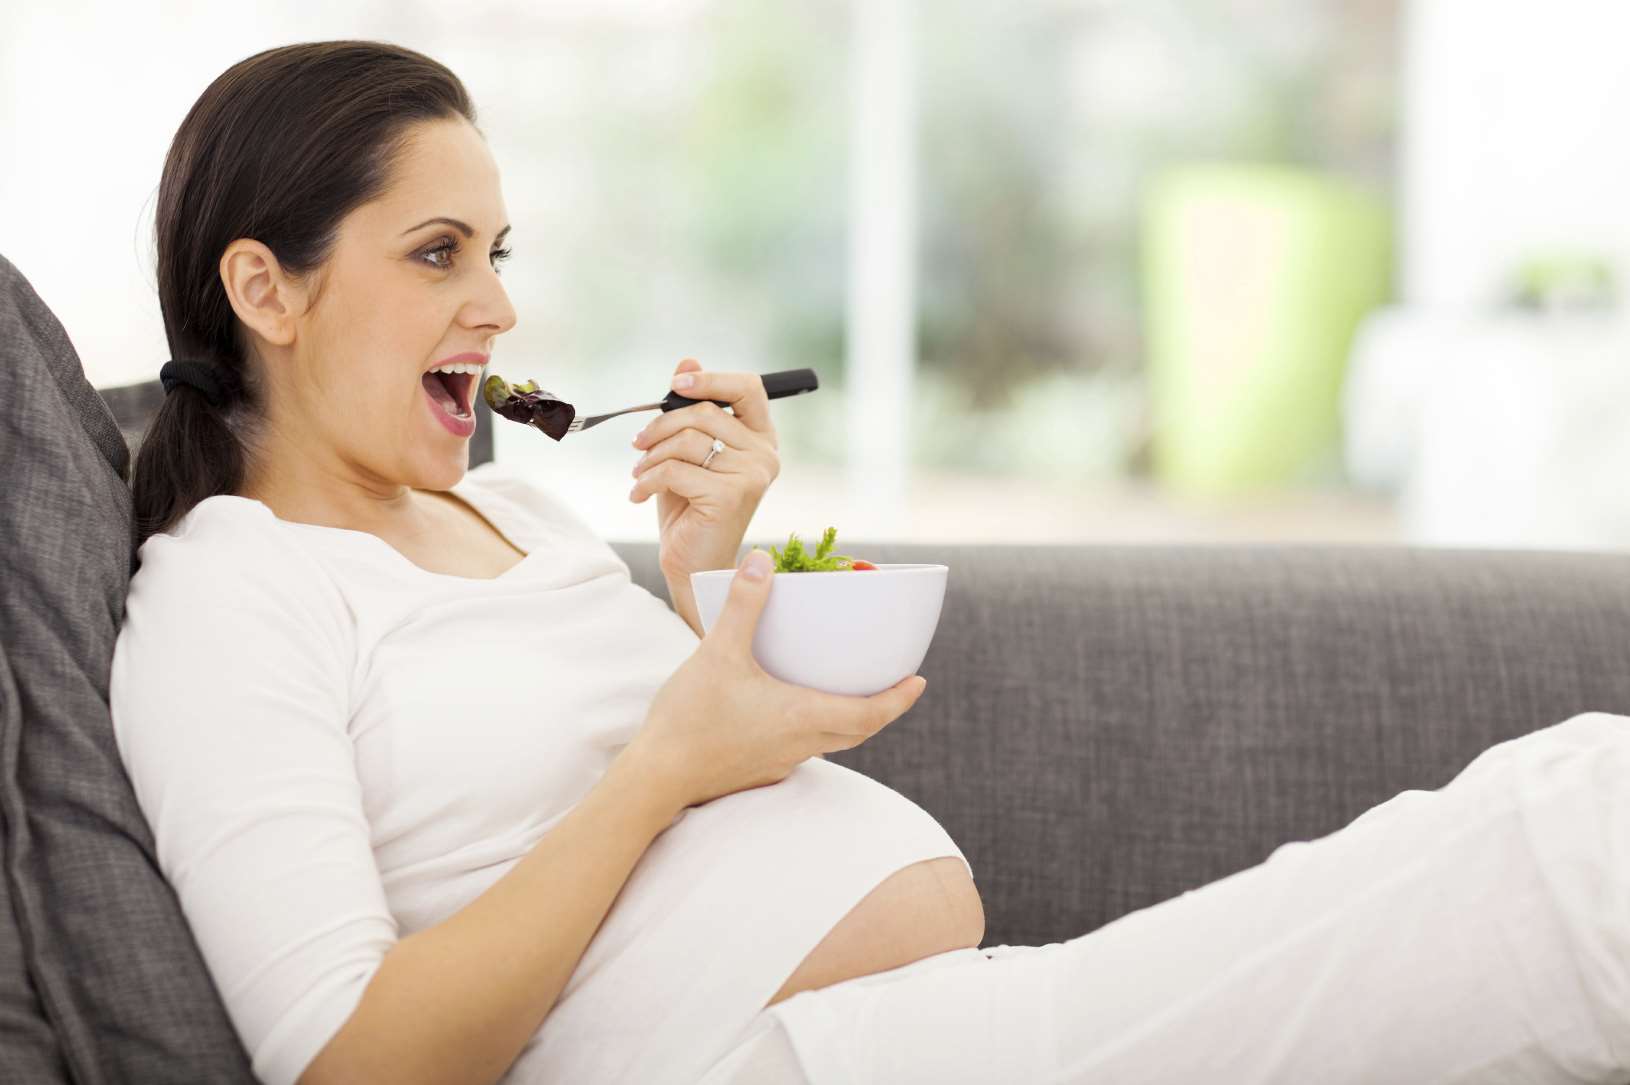 Pregnant women should focus on improving their diet